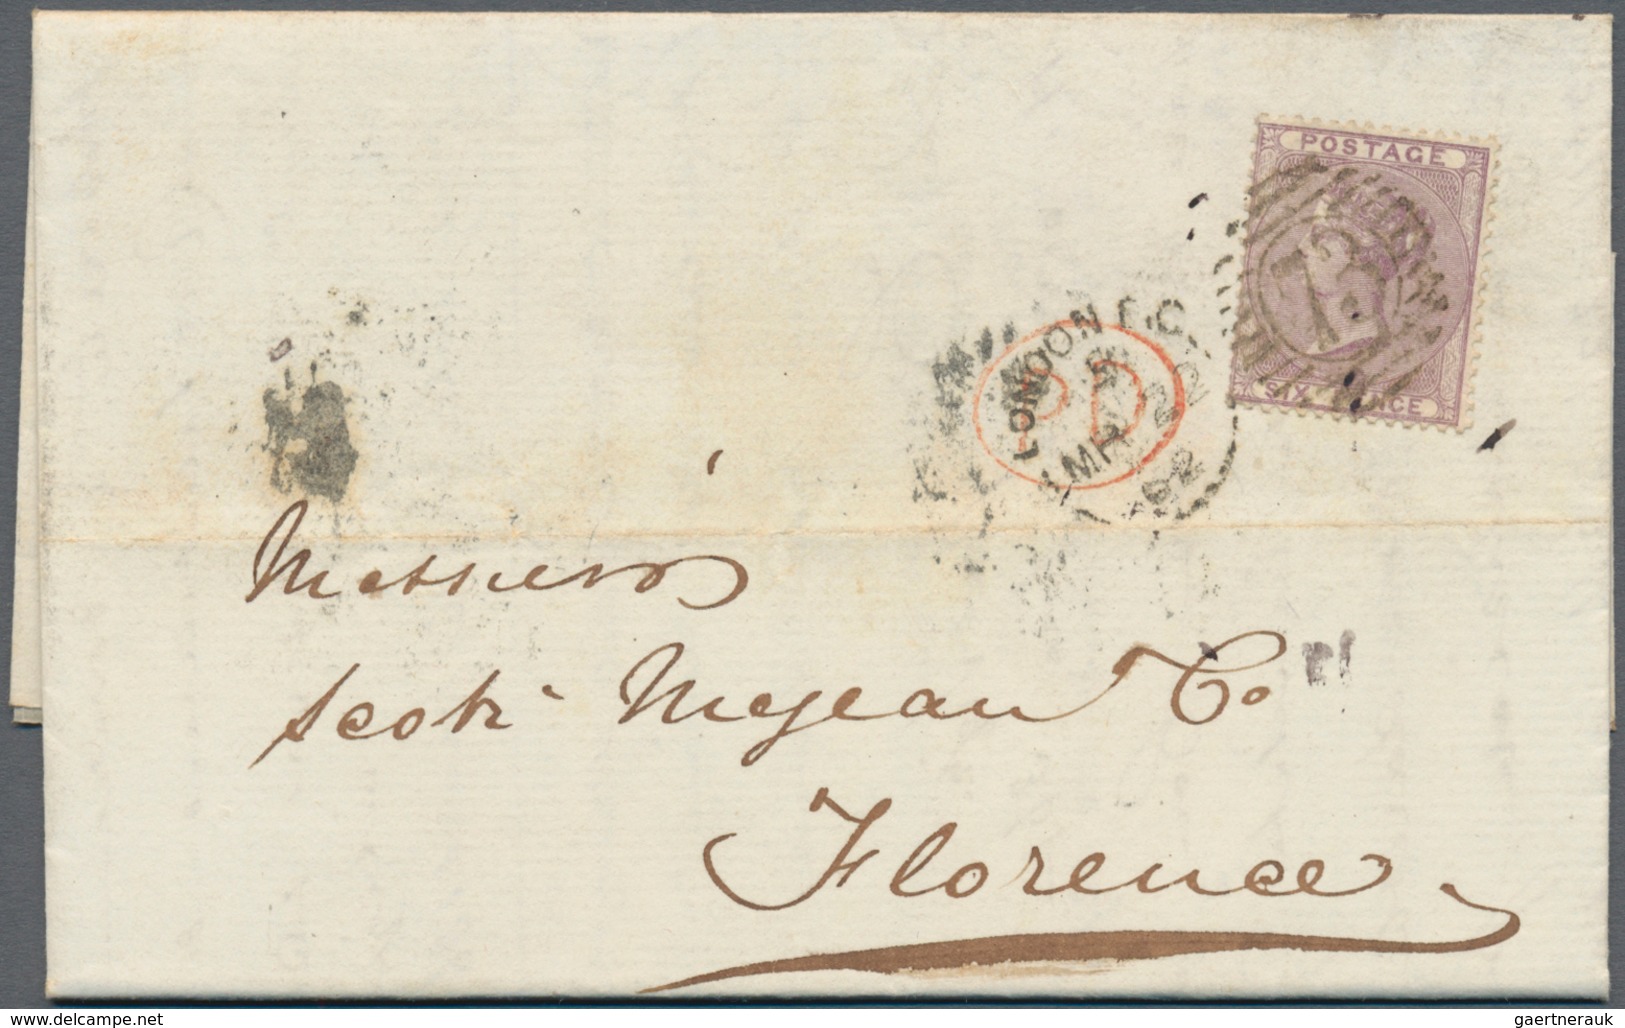 Großbritannien: 1861/1869, 6d. foreign rate franked by surface-printed issues, lot of 52 lettersheet